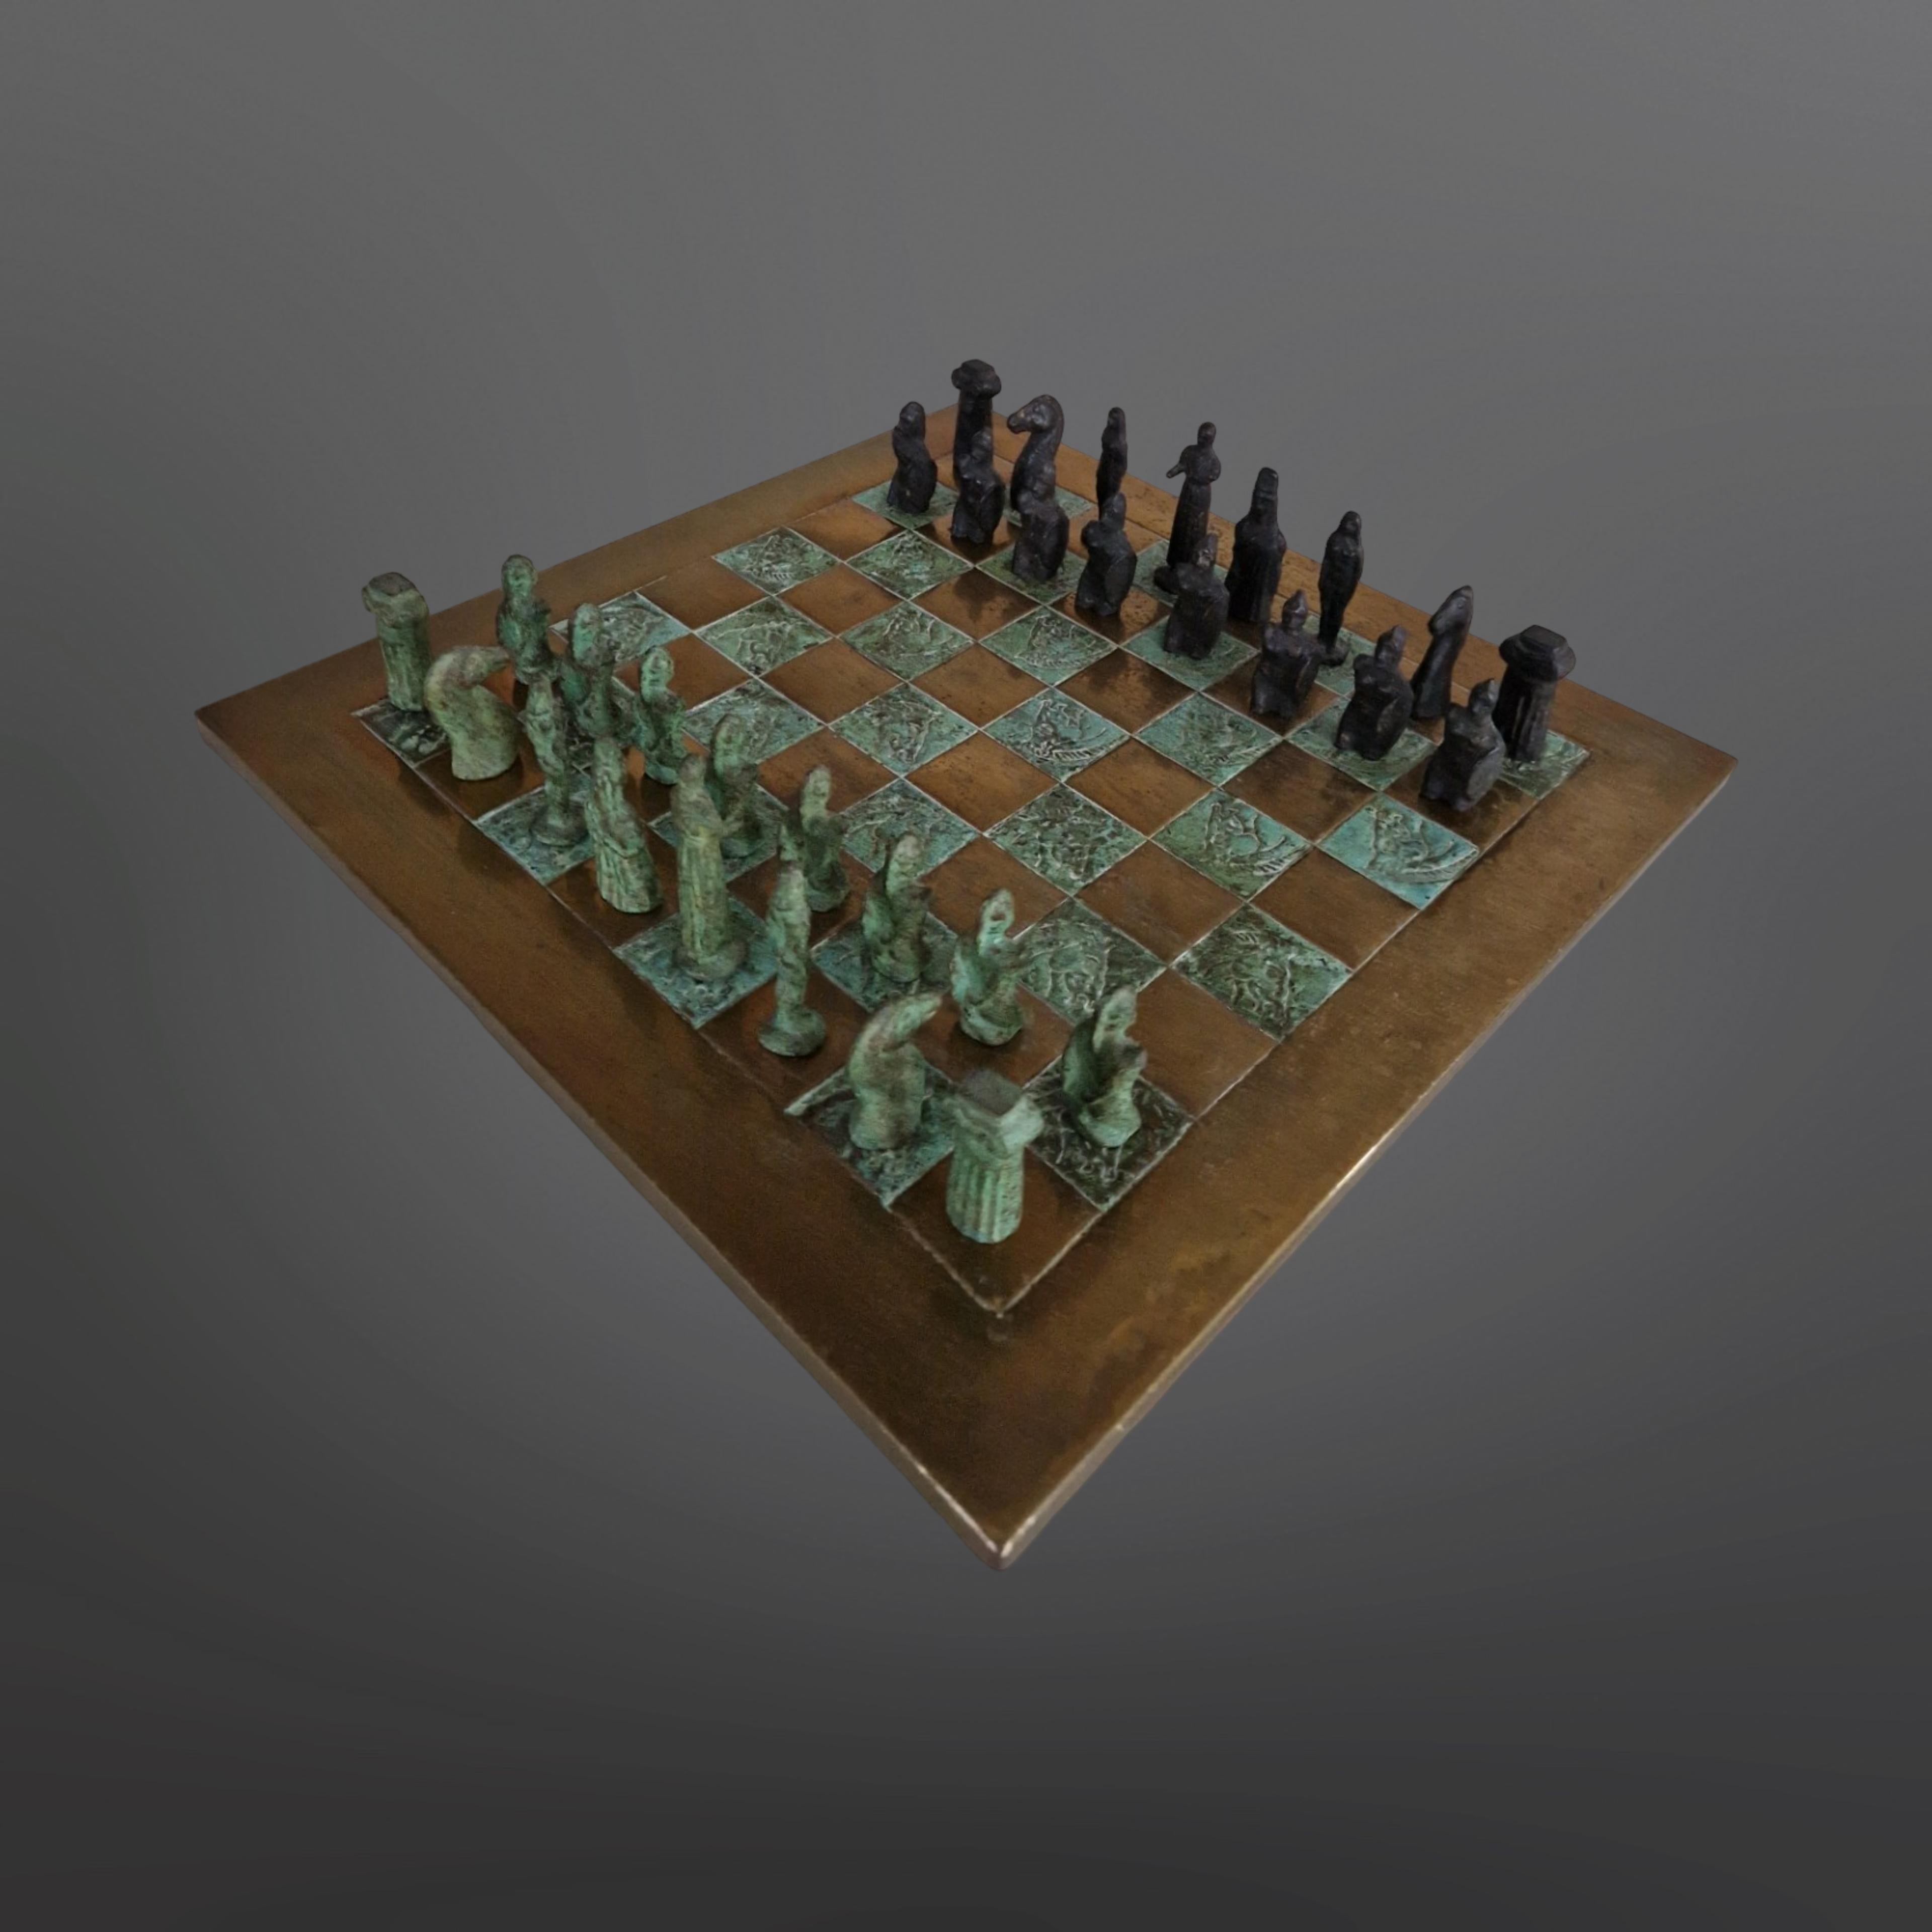 Unknown Brutalist cast bronze chess set with copper board, 1960s